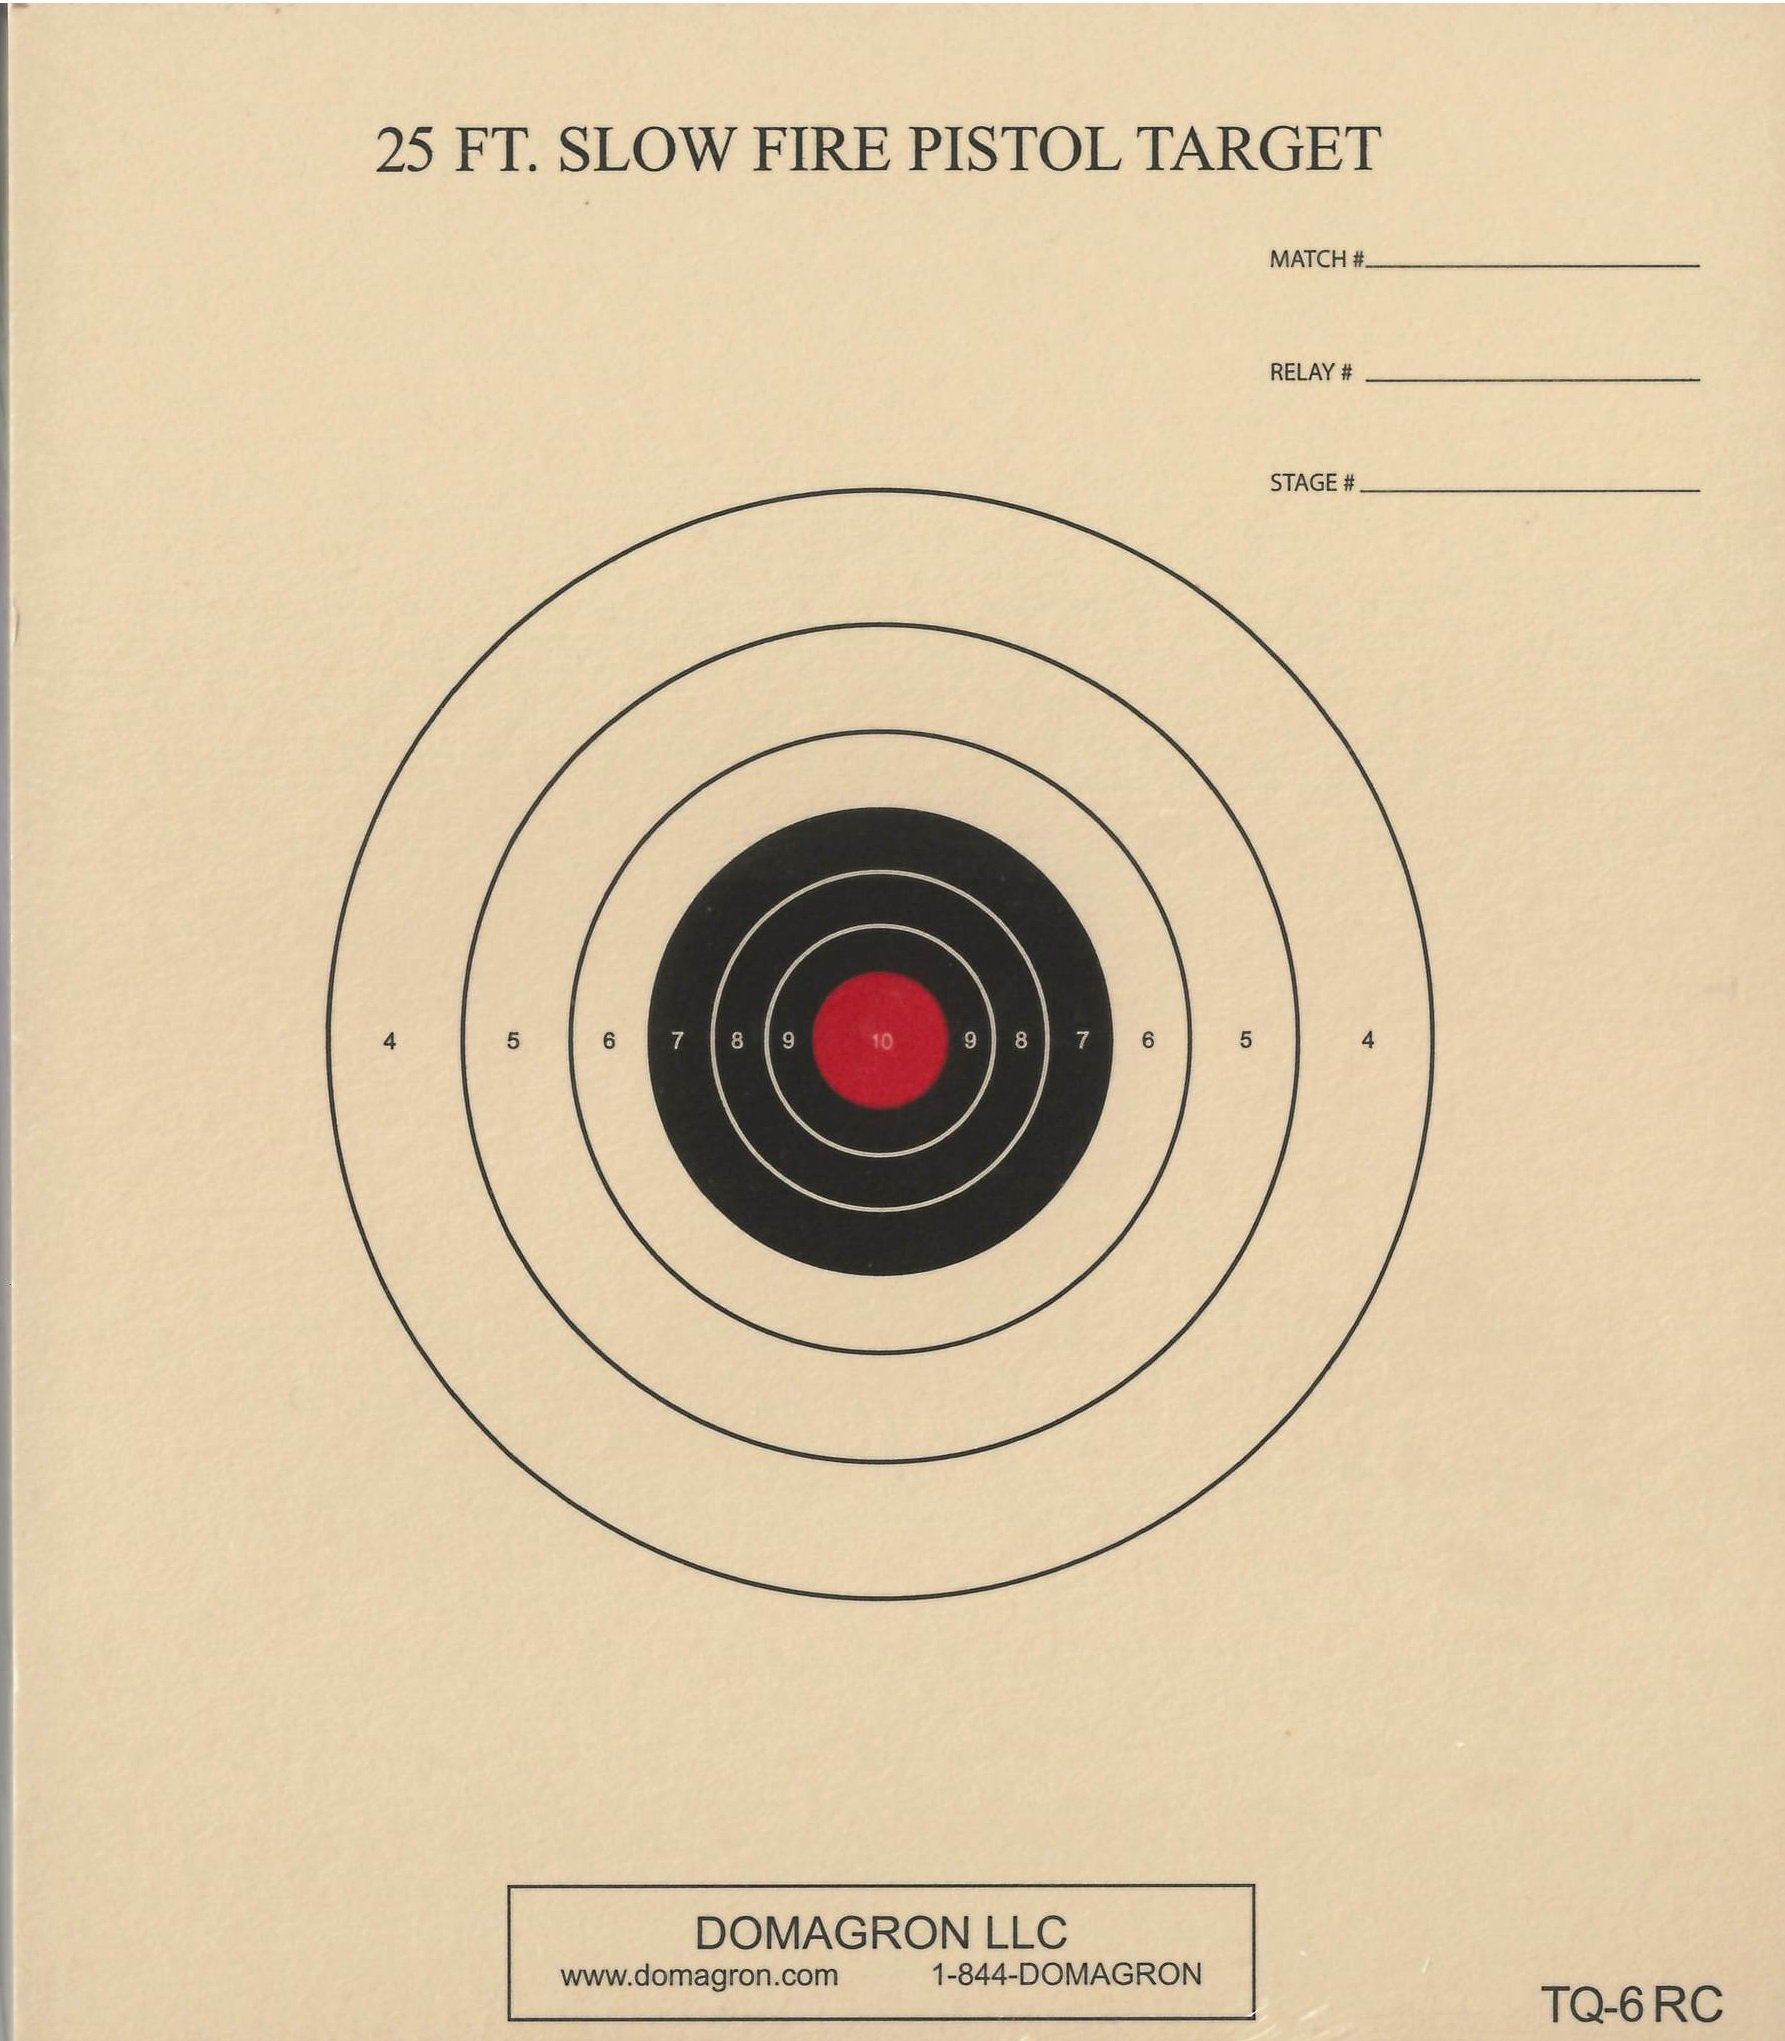 100 targets on heavy paper NRA TQ-6 Official 25 Foot Slow Fire Pistol Target 